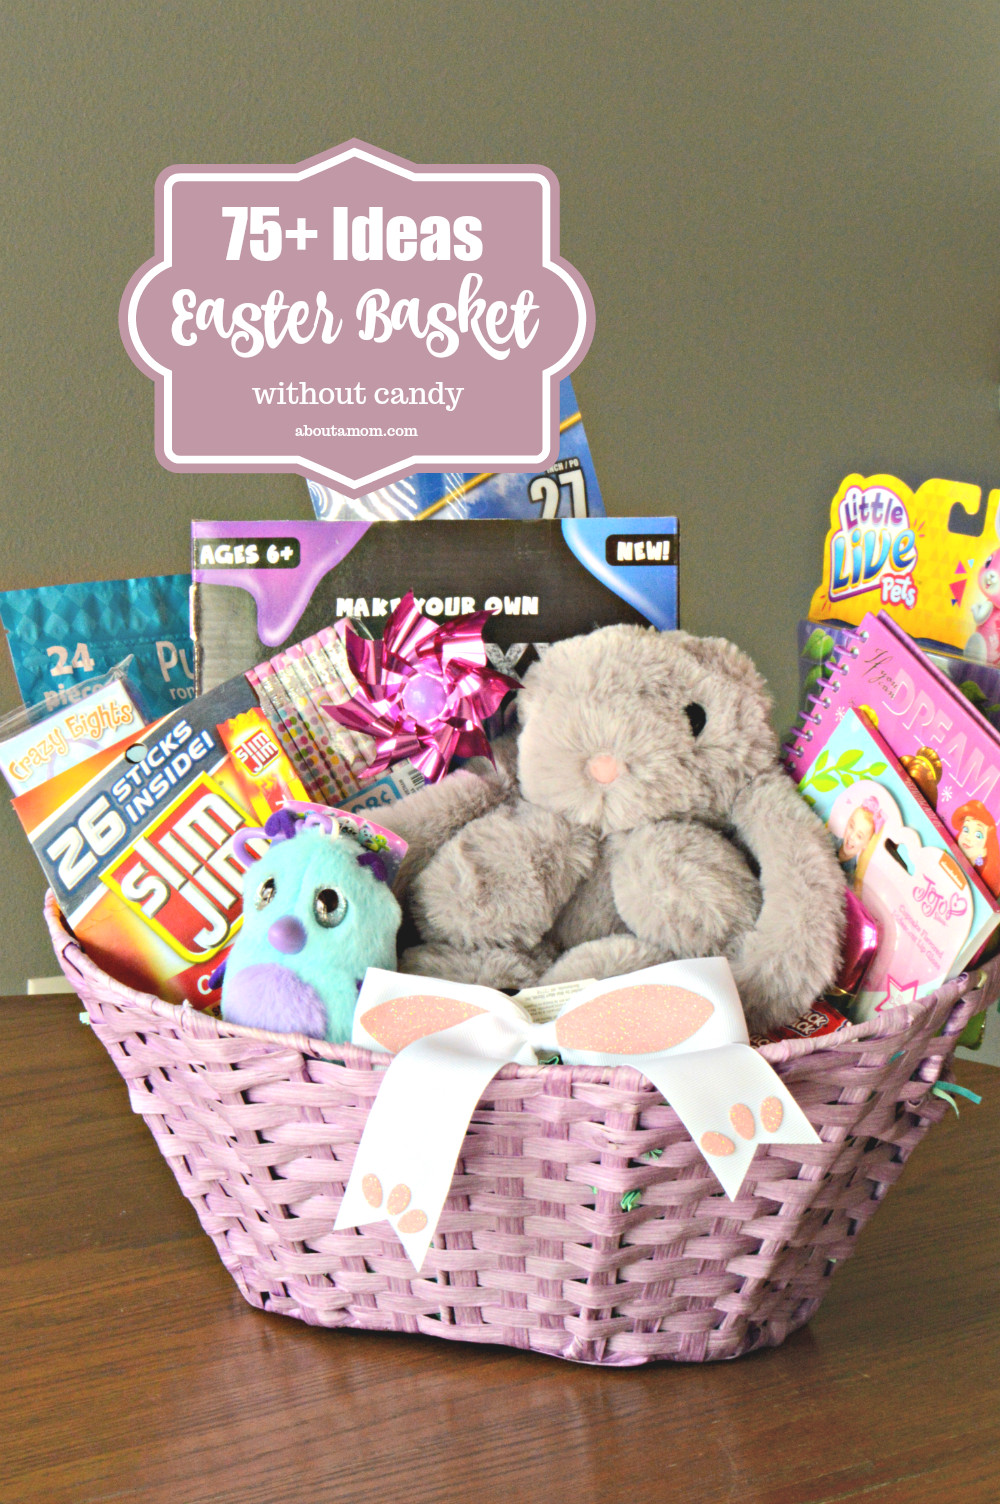 Easter Basket Gift Ideas
 75 Fun Easter Basket Ideas About A Mom